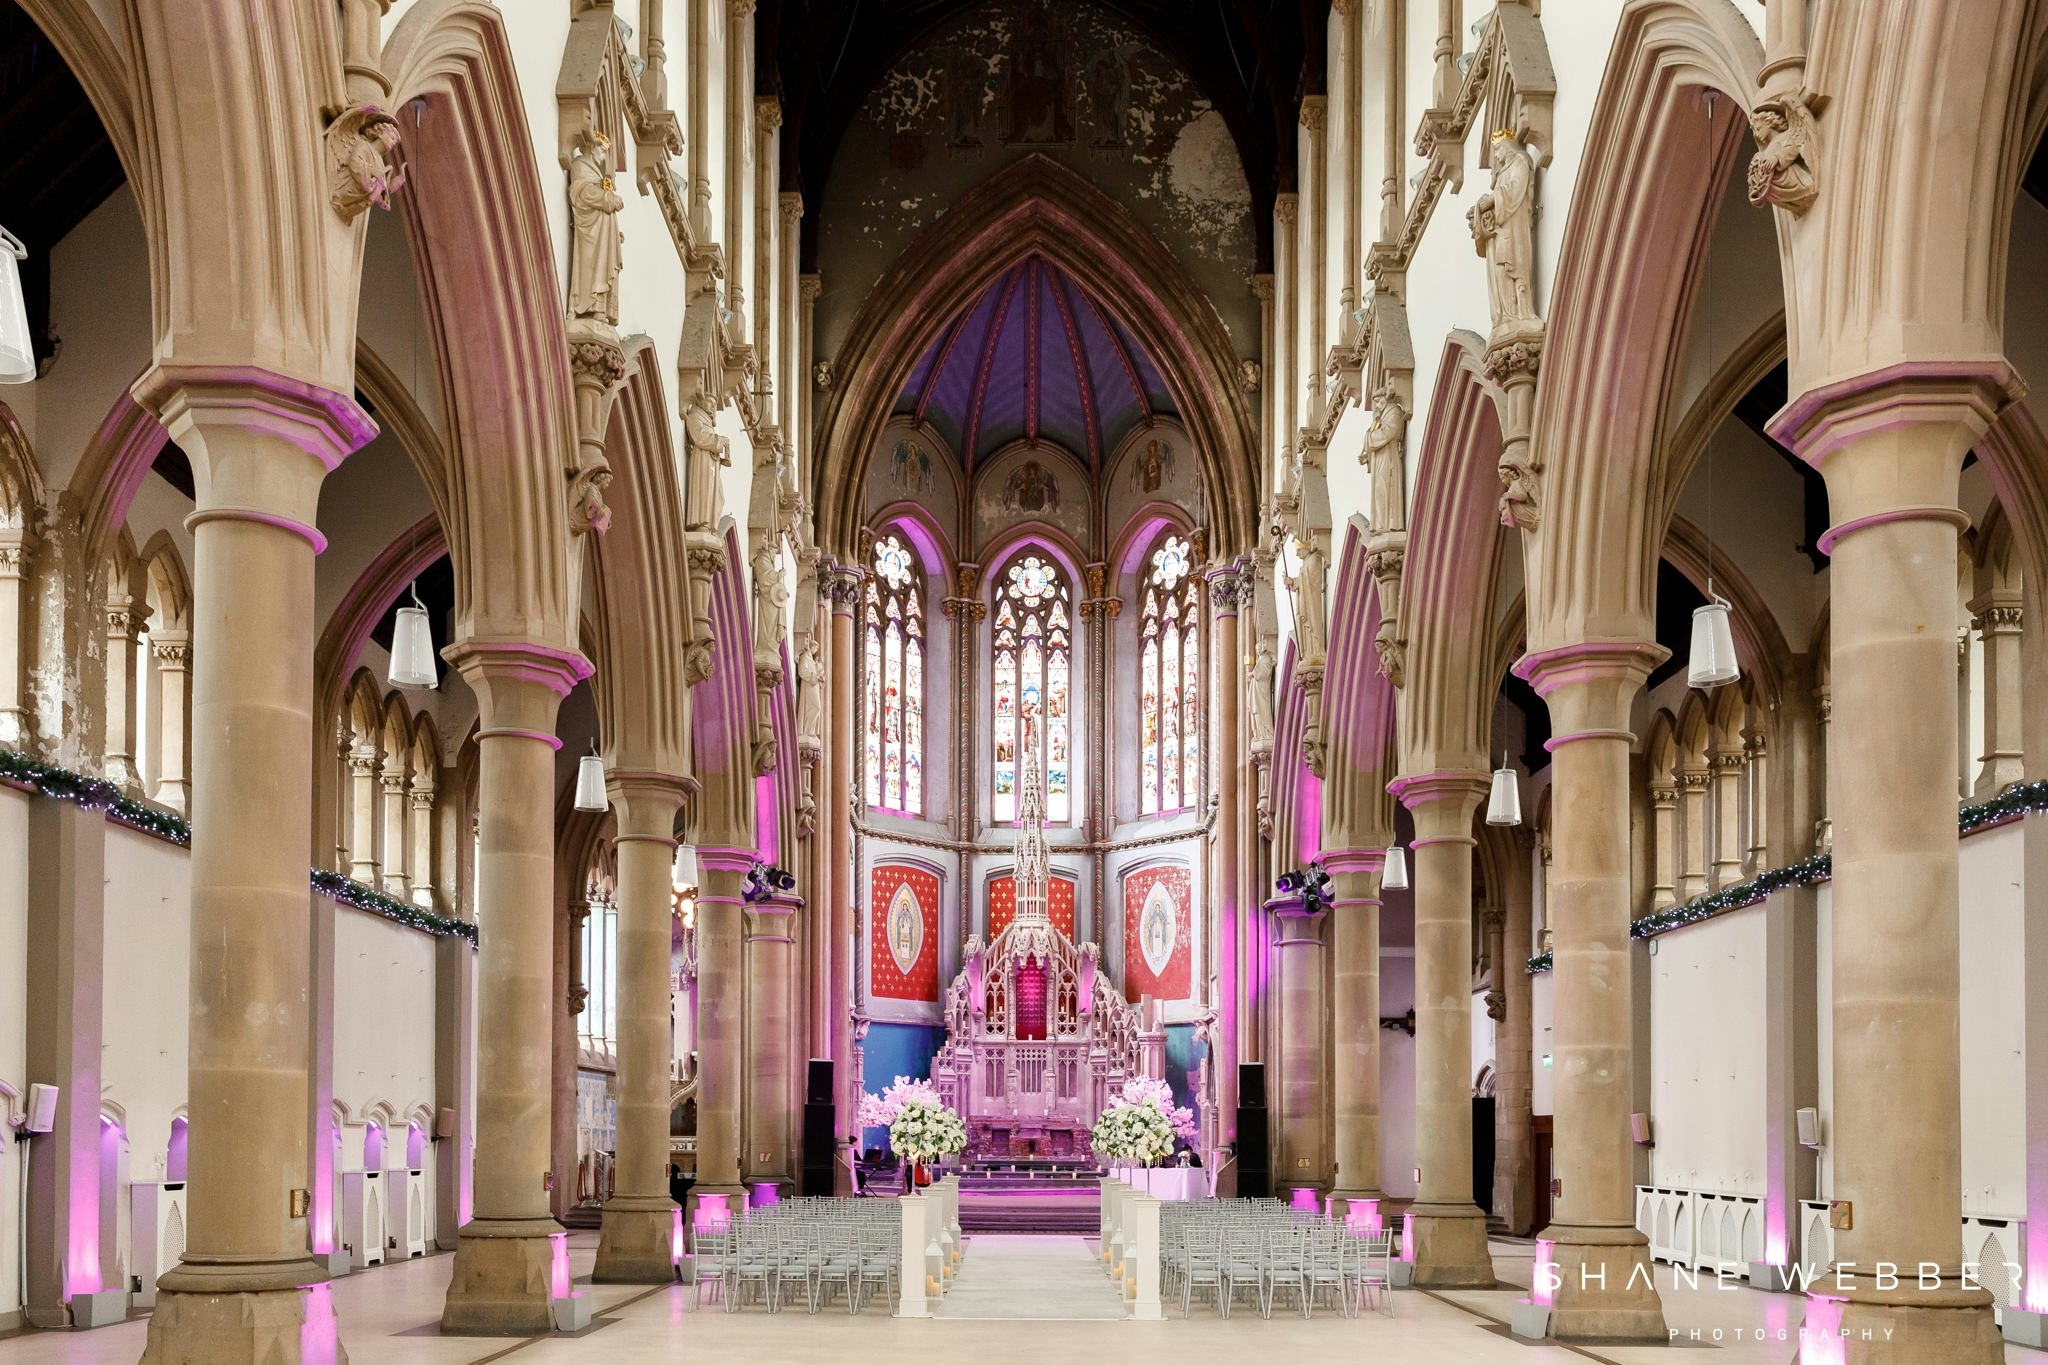 The Monastery Manchester - Great Nave image 9